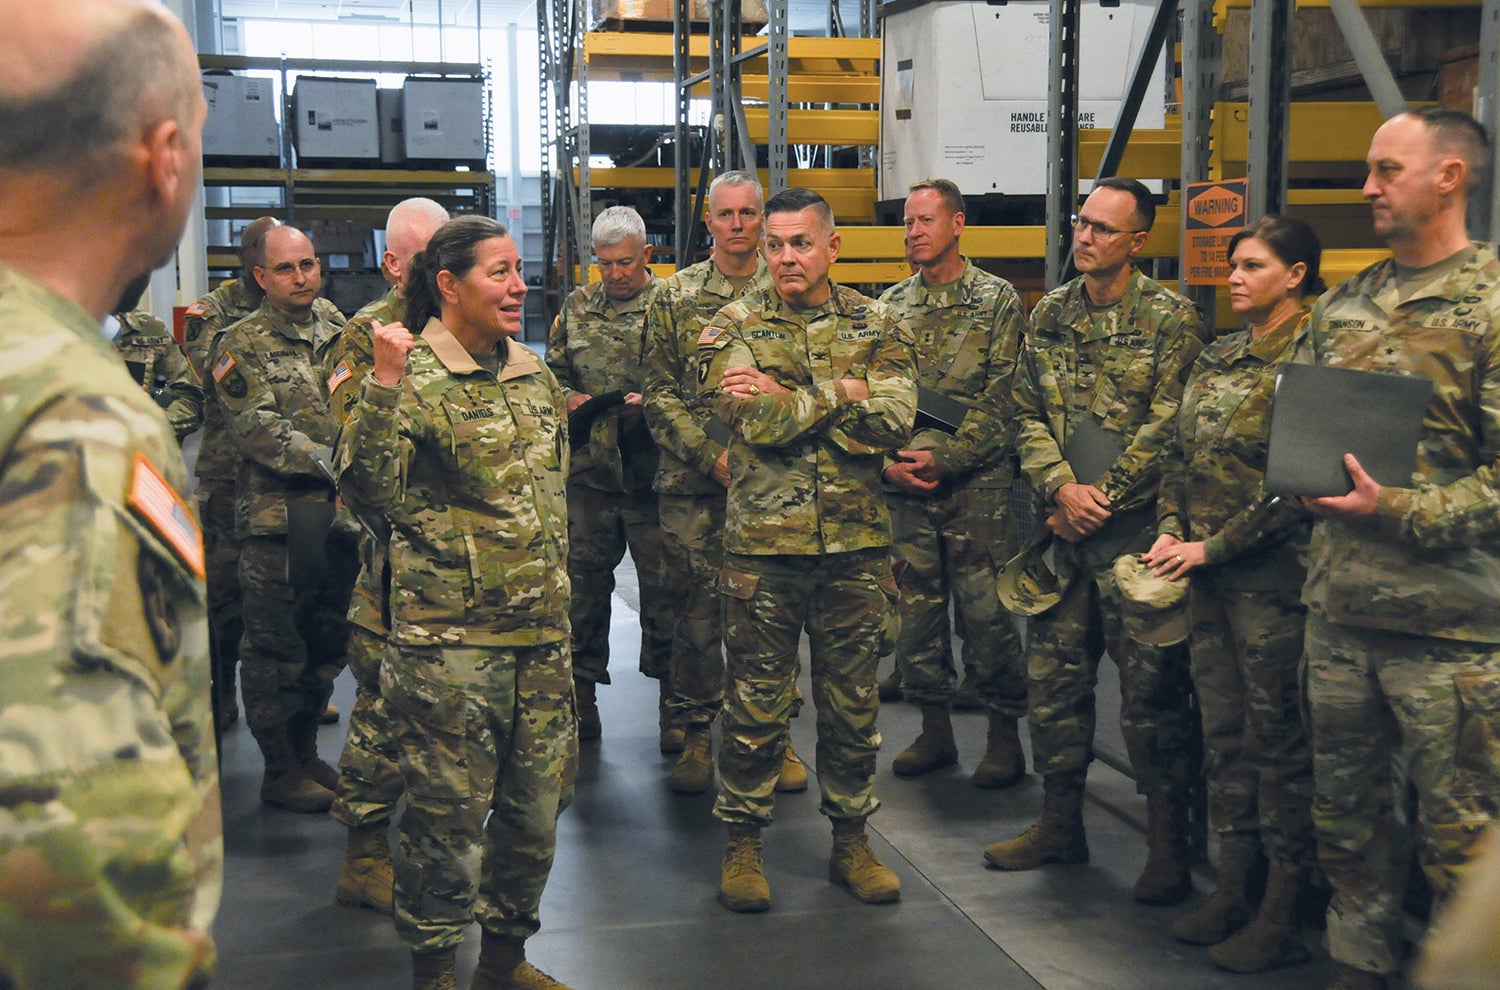 Lt. Gen. Jody Daniels, left, chief of the U.S. Army Reserve and commanding general of the U.S. Army Reserve Command, leads Army Reserve senior leaders on a tour of a 99th Readiness Division equipment and vehicle maintenance and storage site at Joint Base McGuire-Dix-Lakehurst, New Jersey. (Credit: U.S. Army/Shawn Morris)